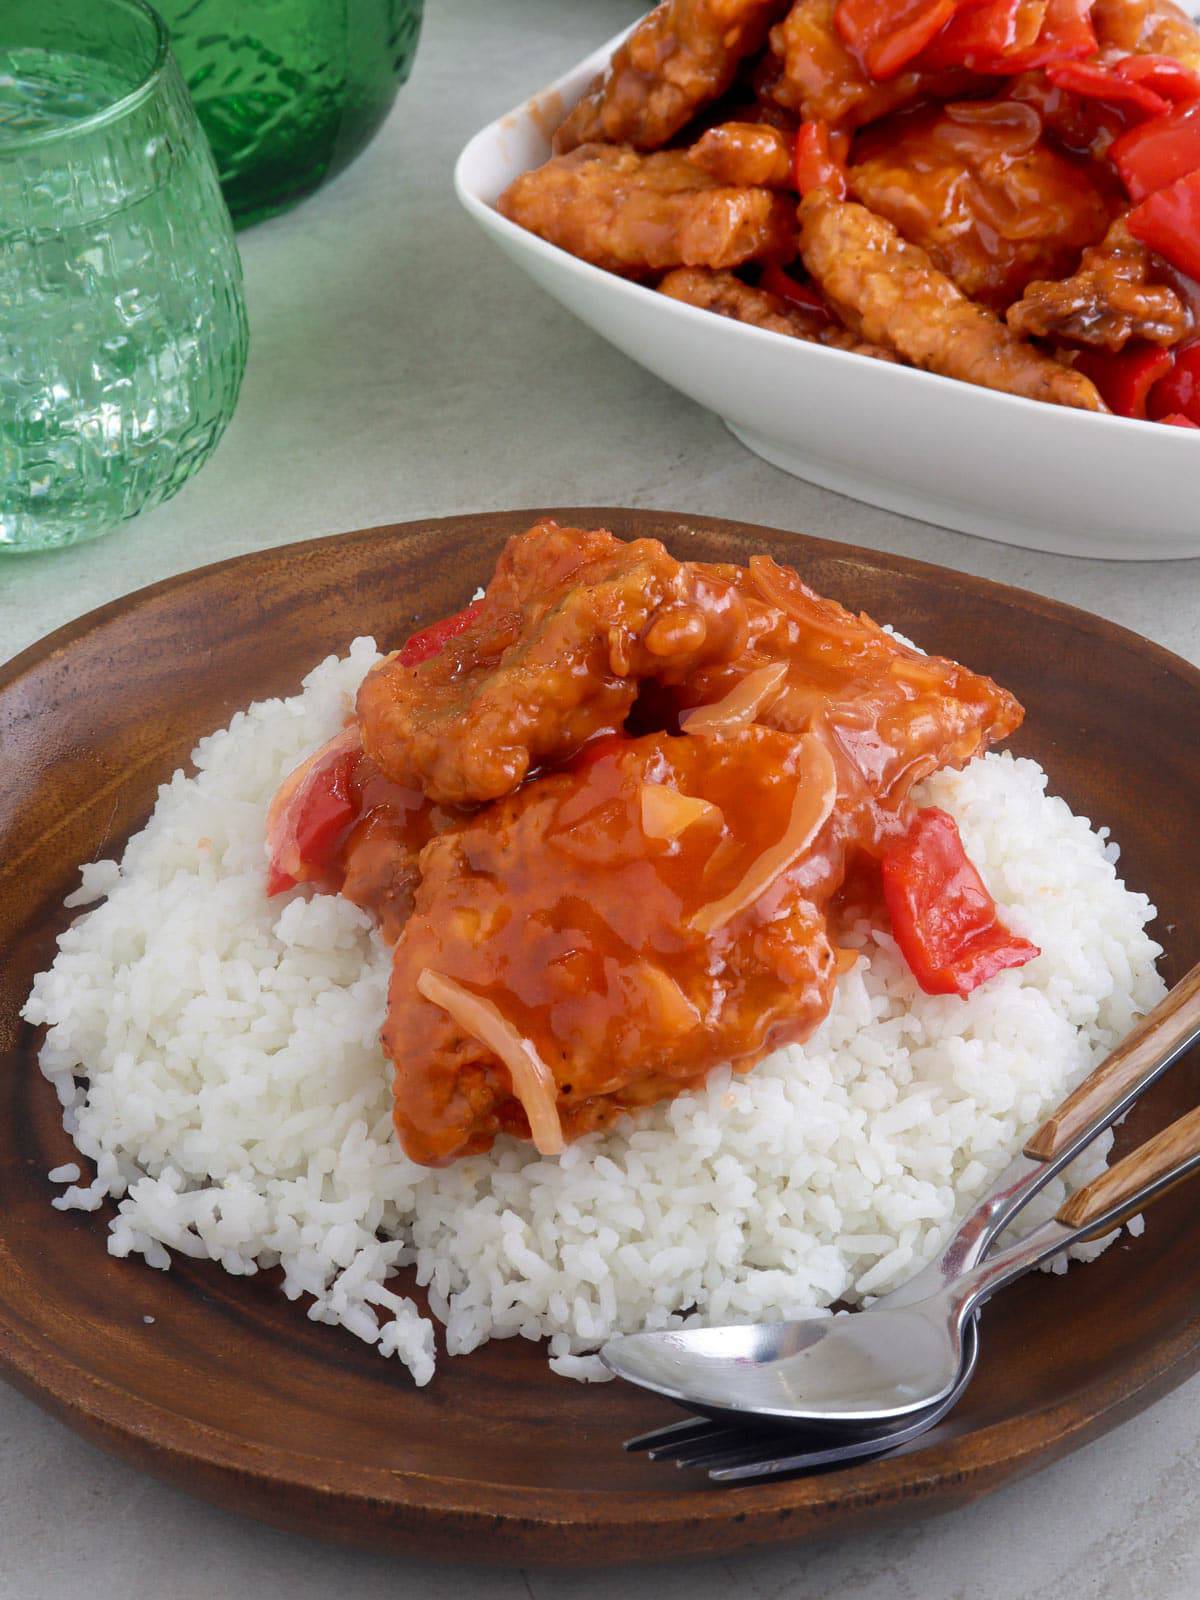 sweet and sour fish over steamed rice on a wooden plate